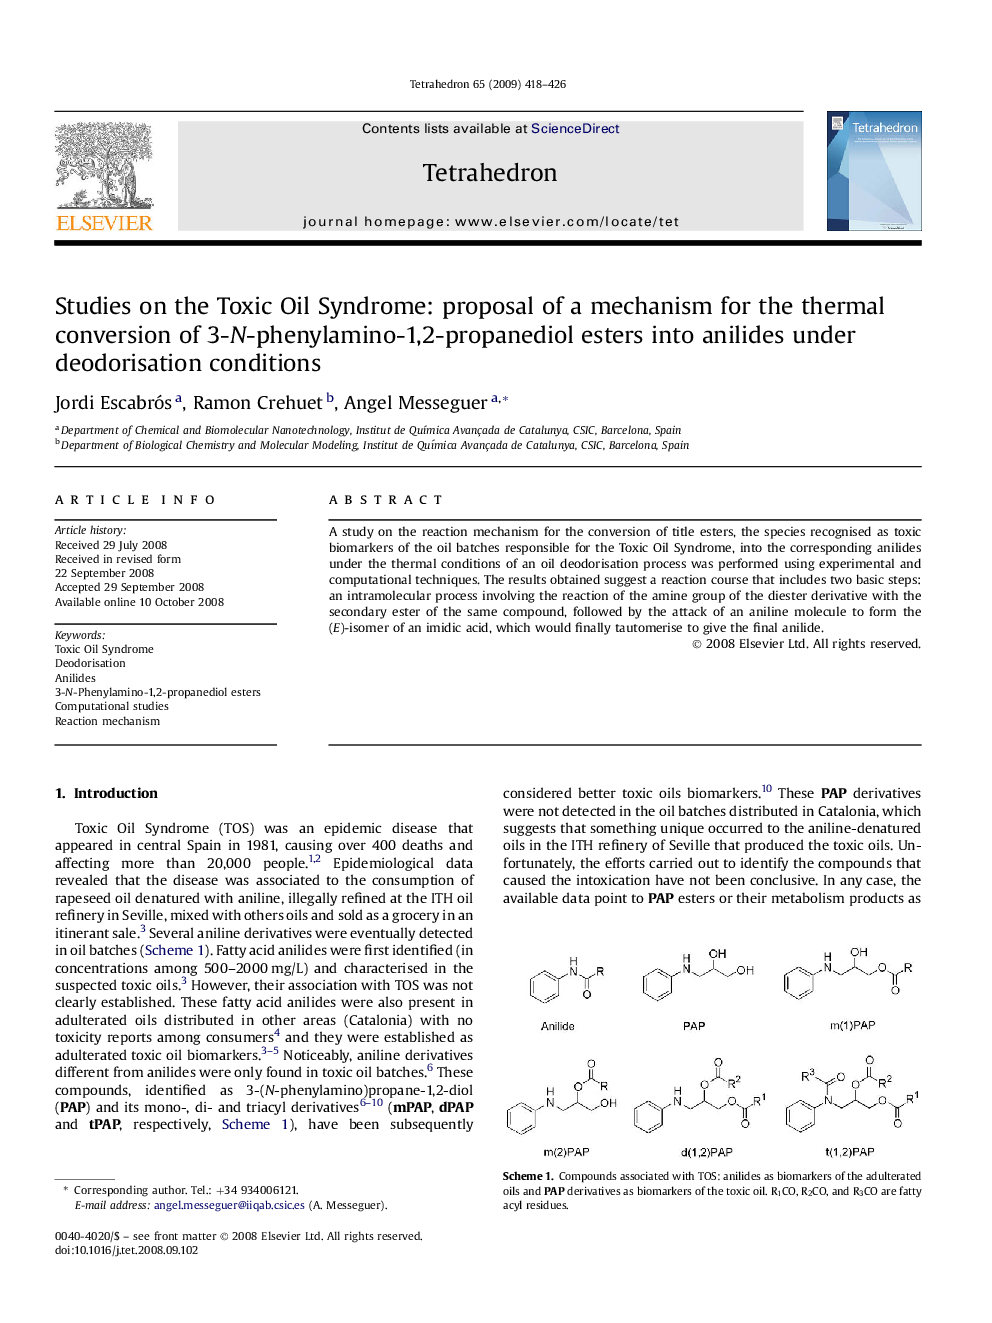 Studies on the Toxic Oil Syndrome: proposal of a mechanism for the thermal conversion of 3-N-phenylamino-1,2-propanediol esters into anilides under deodorisation conditions